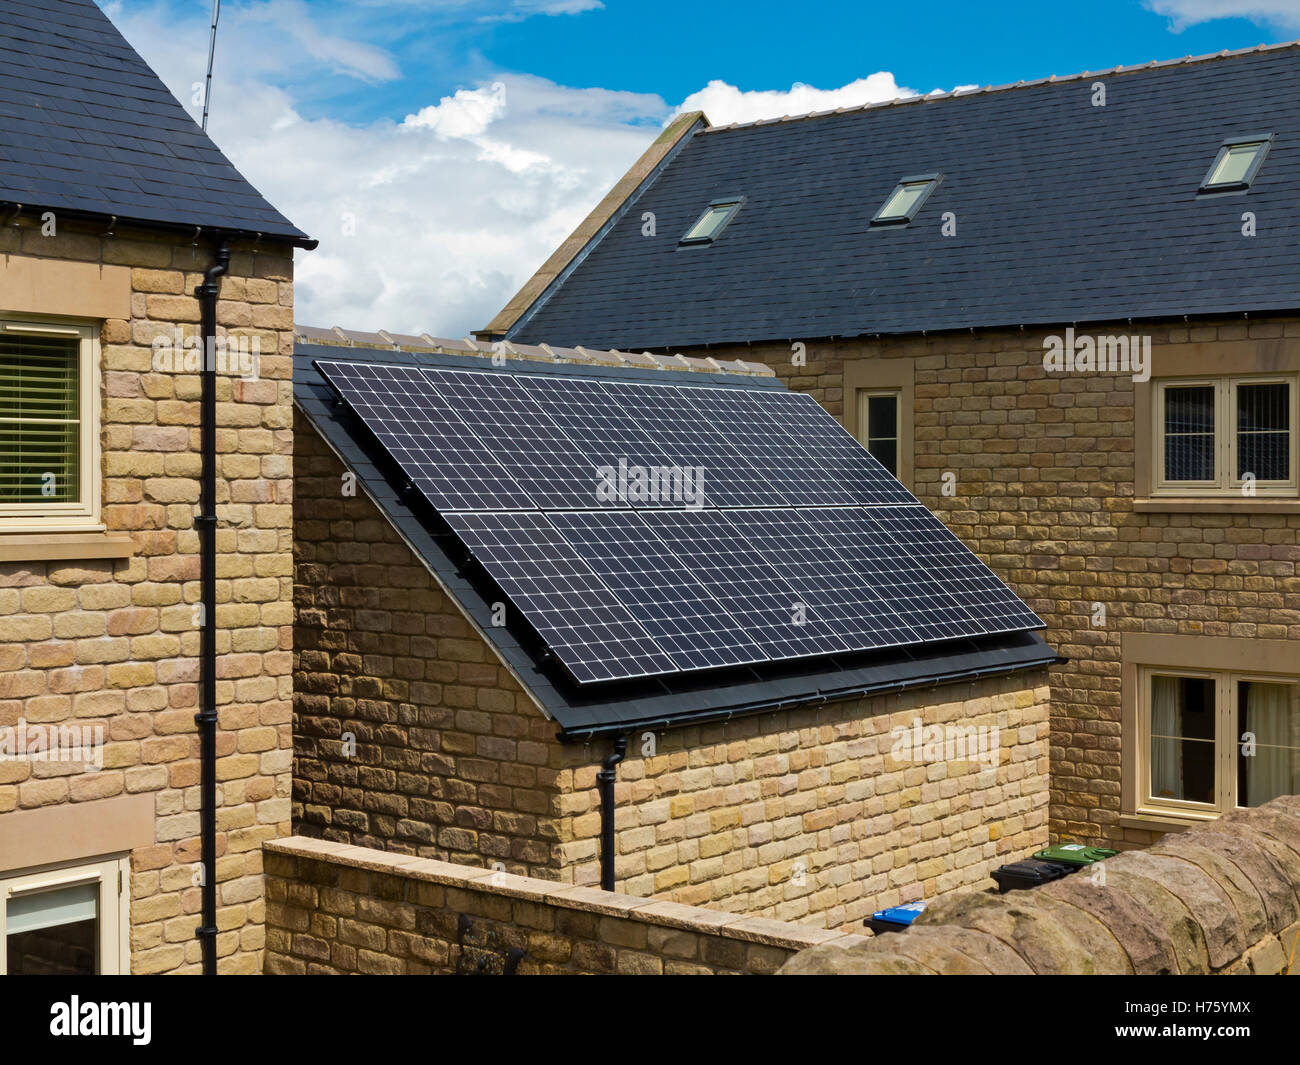 Solar panels on roof of newly built house in Derbyshire England UK Stock Photo